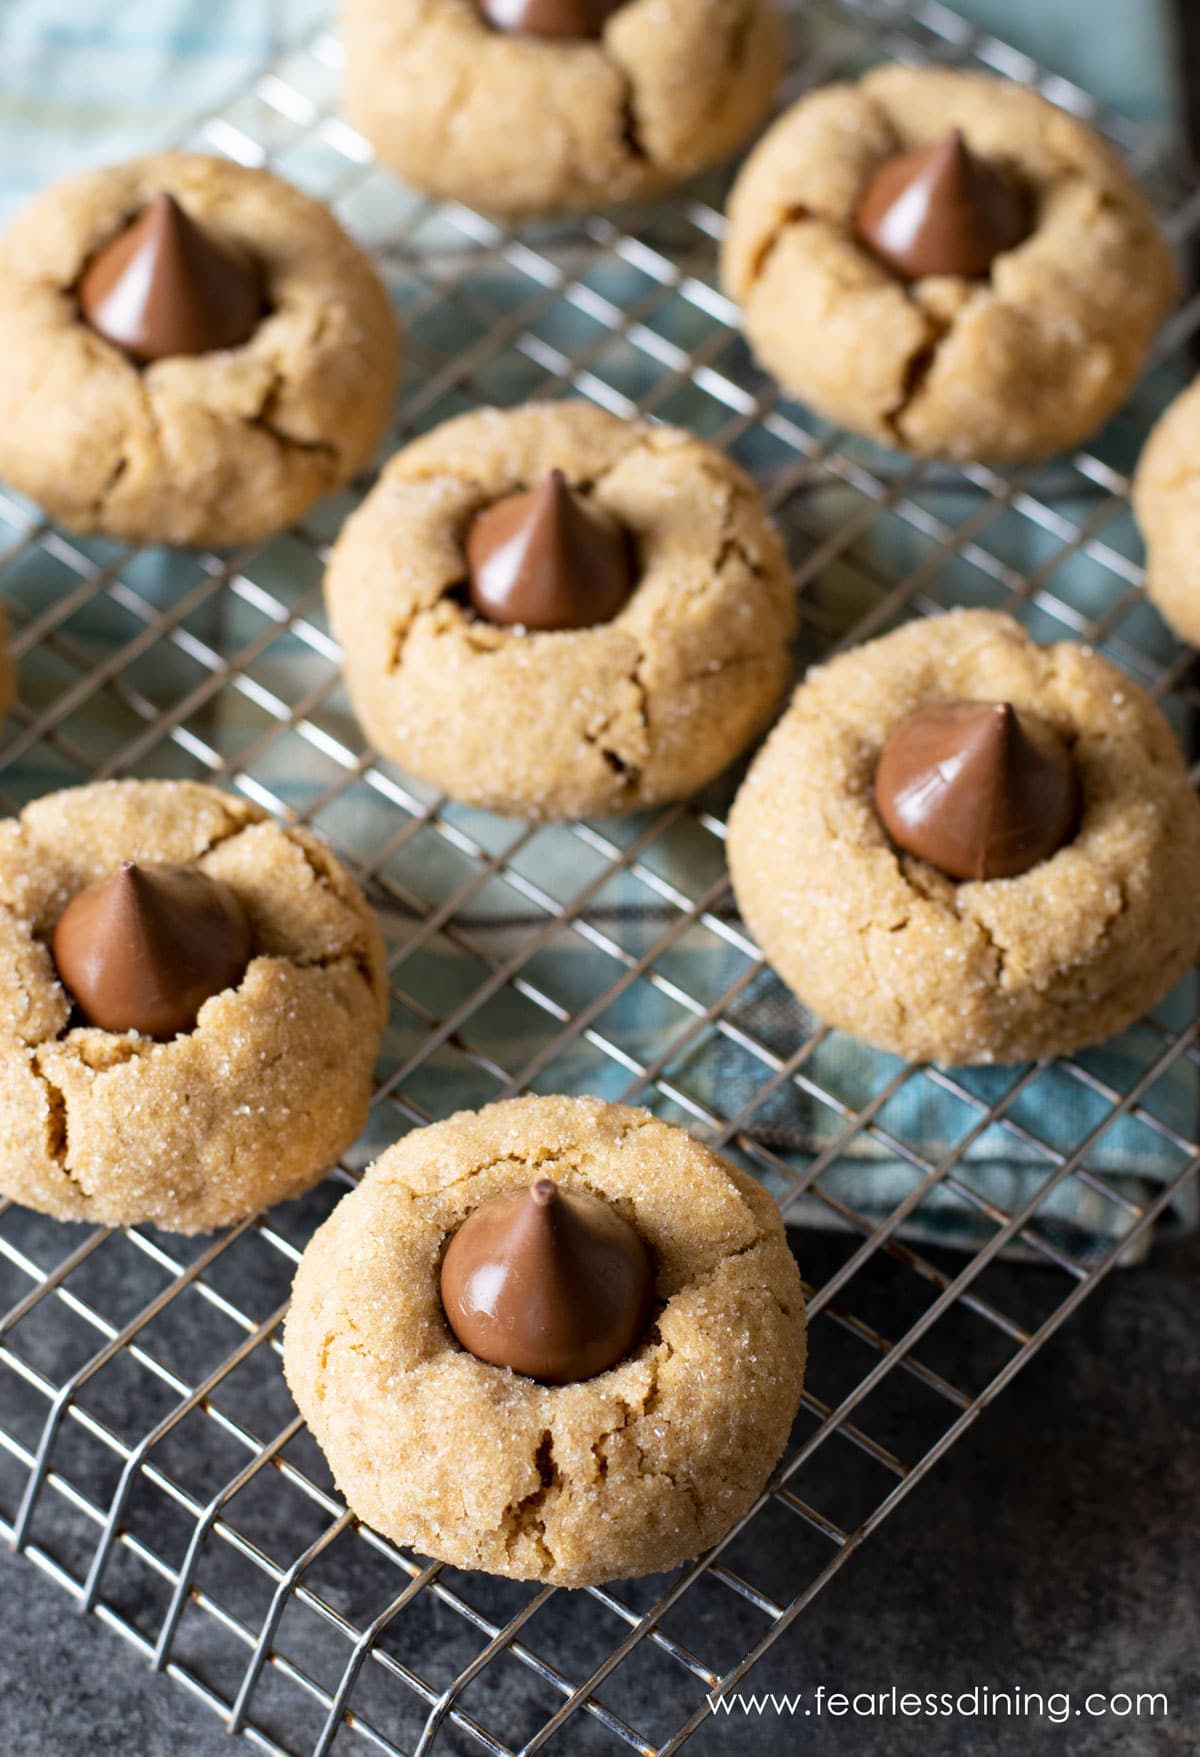 Peanut butter blossoms cooling on a rack.